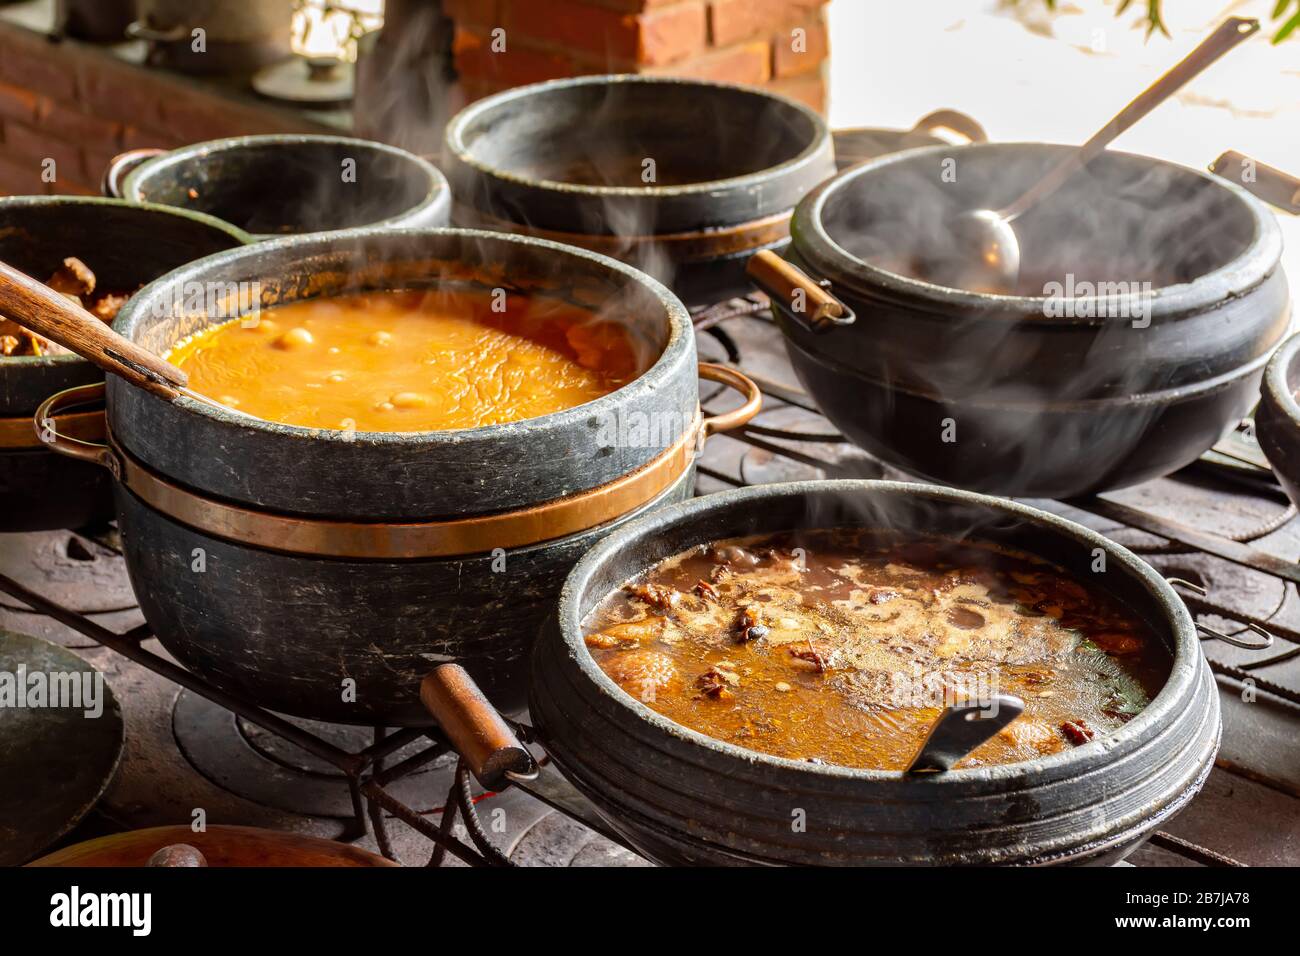 Typical Brazilian foods placed in clay pots and on a metal plate of a traditional wood stove Stock Photo